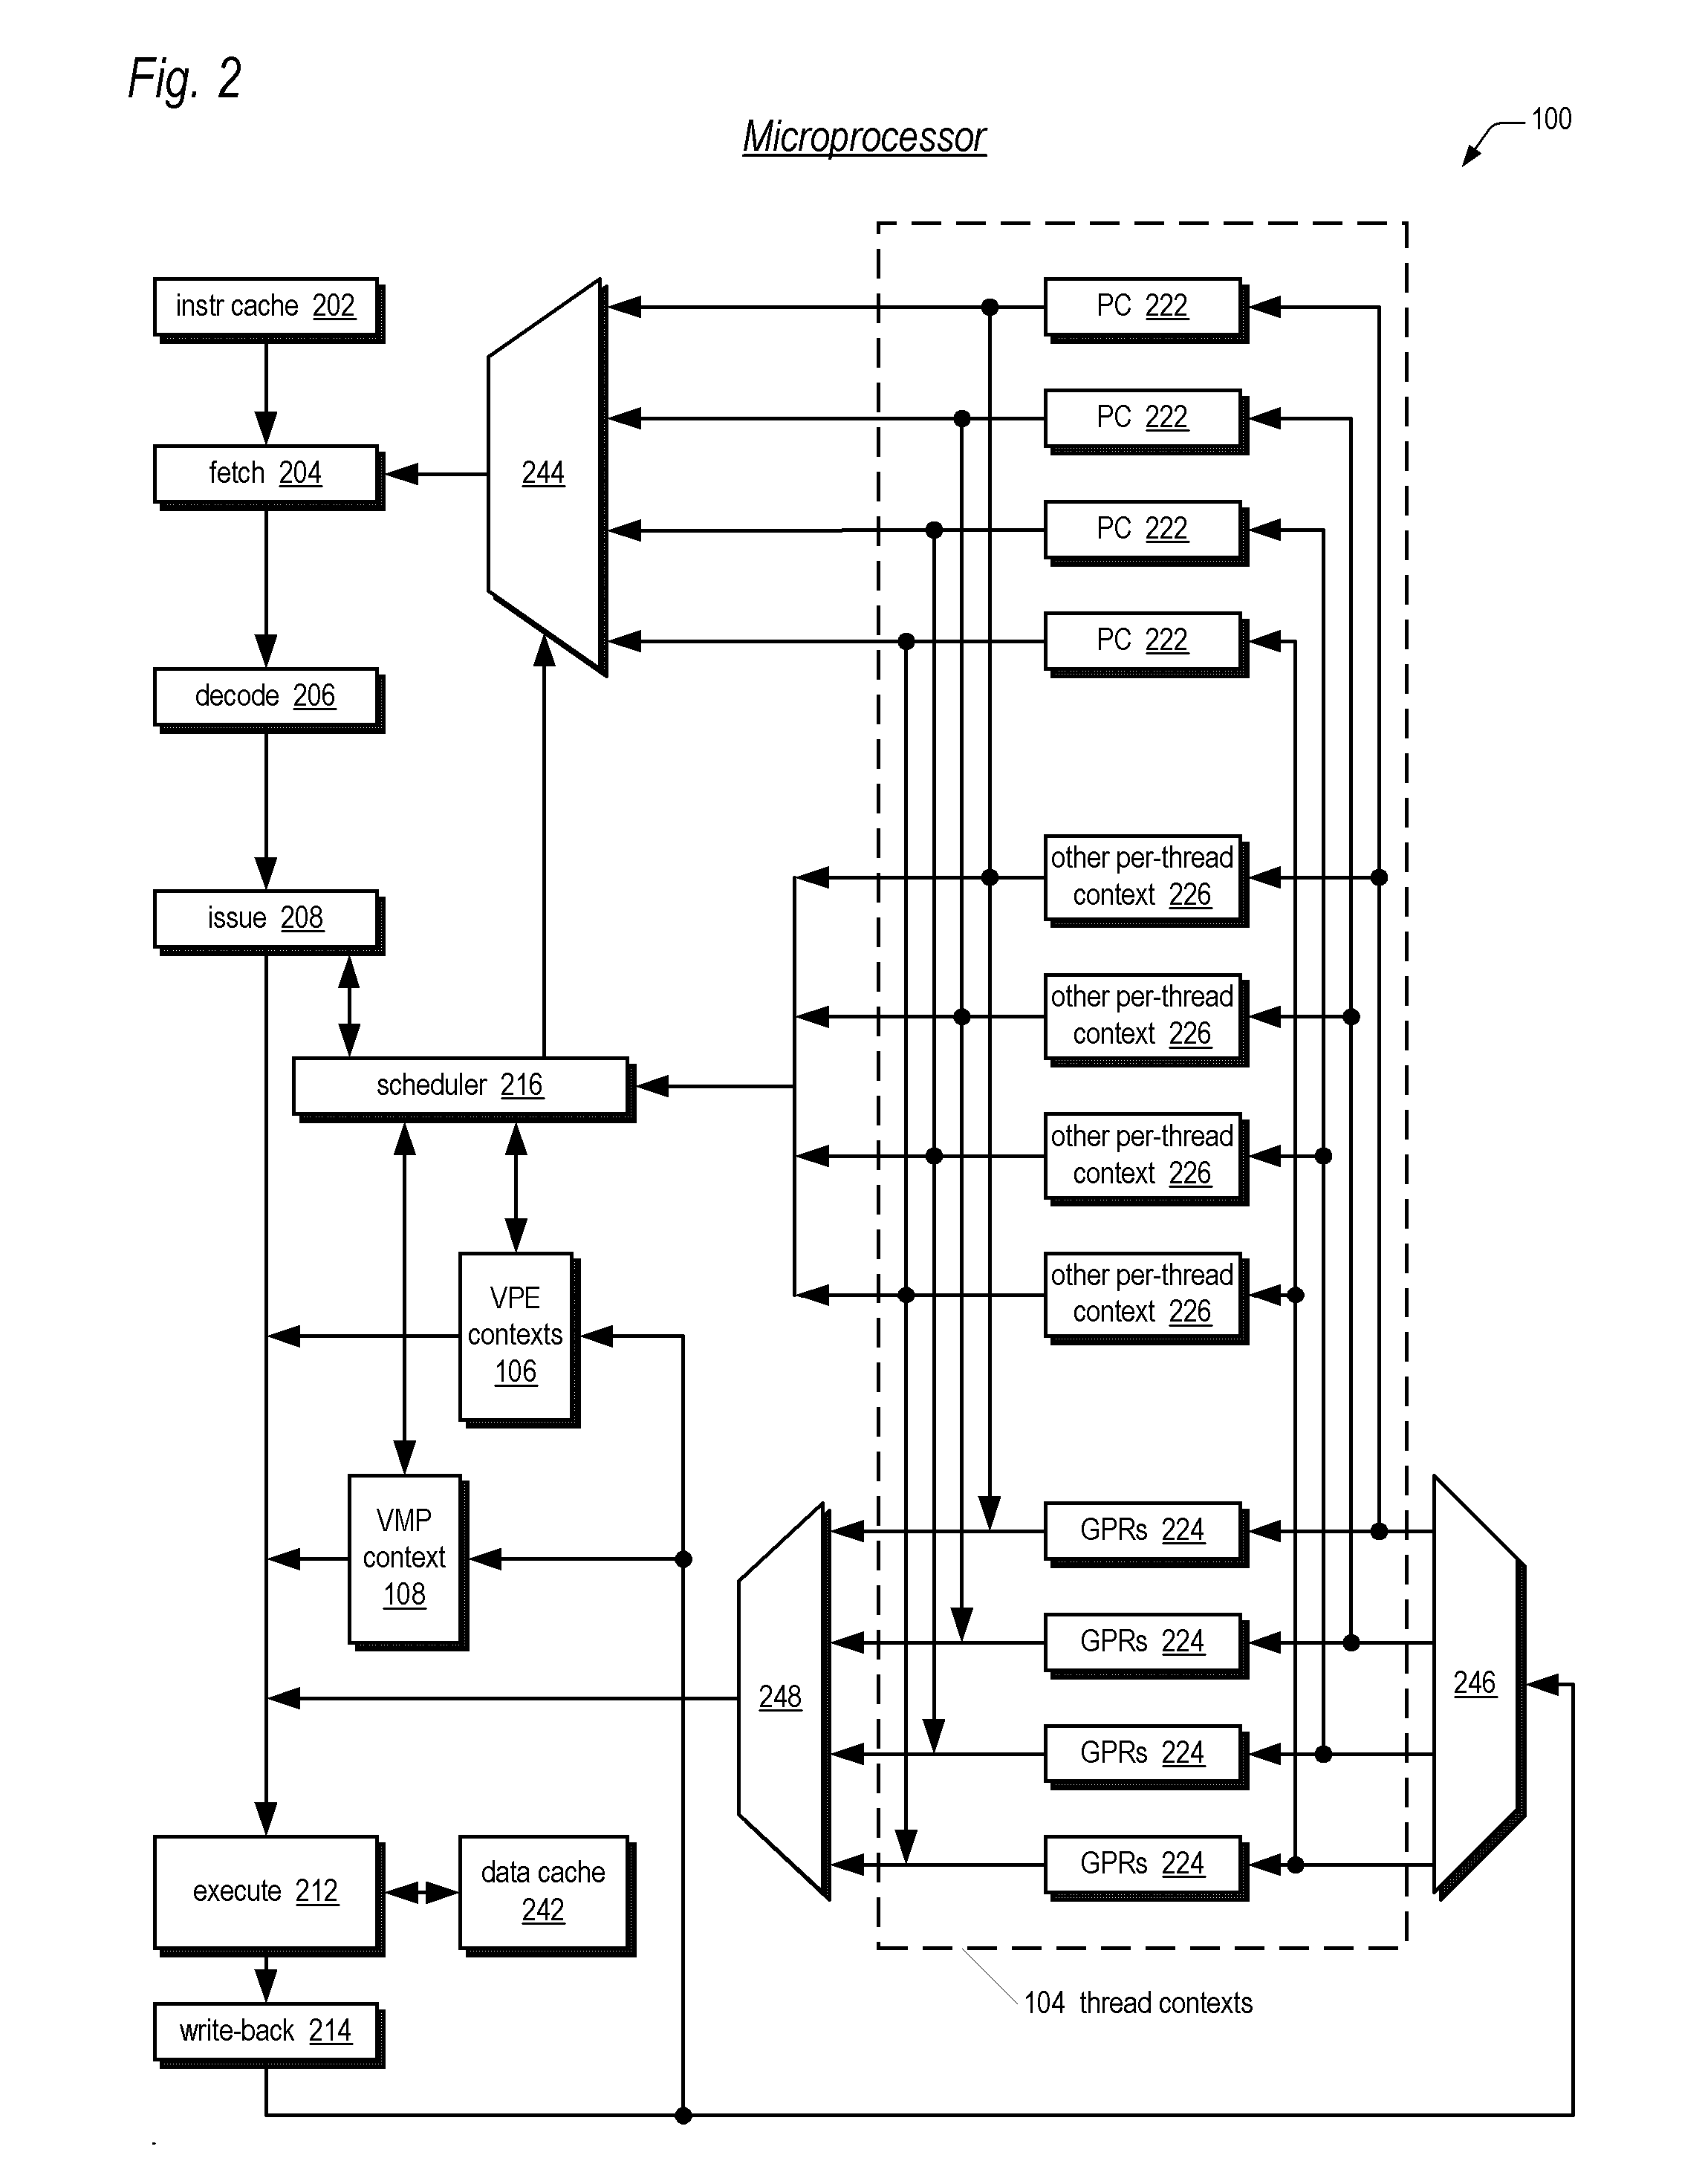 Symmetric multiprocessor operating system for execution on non-independent lightweight thread contexts